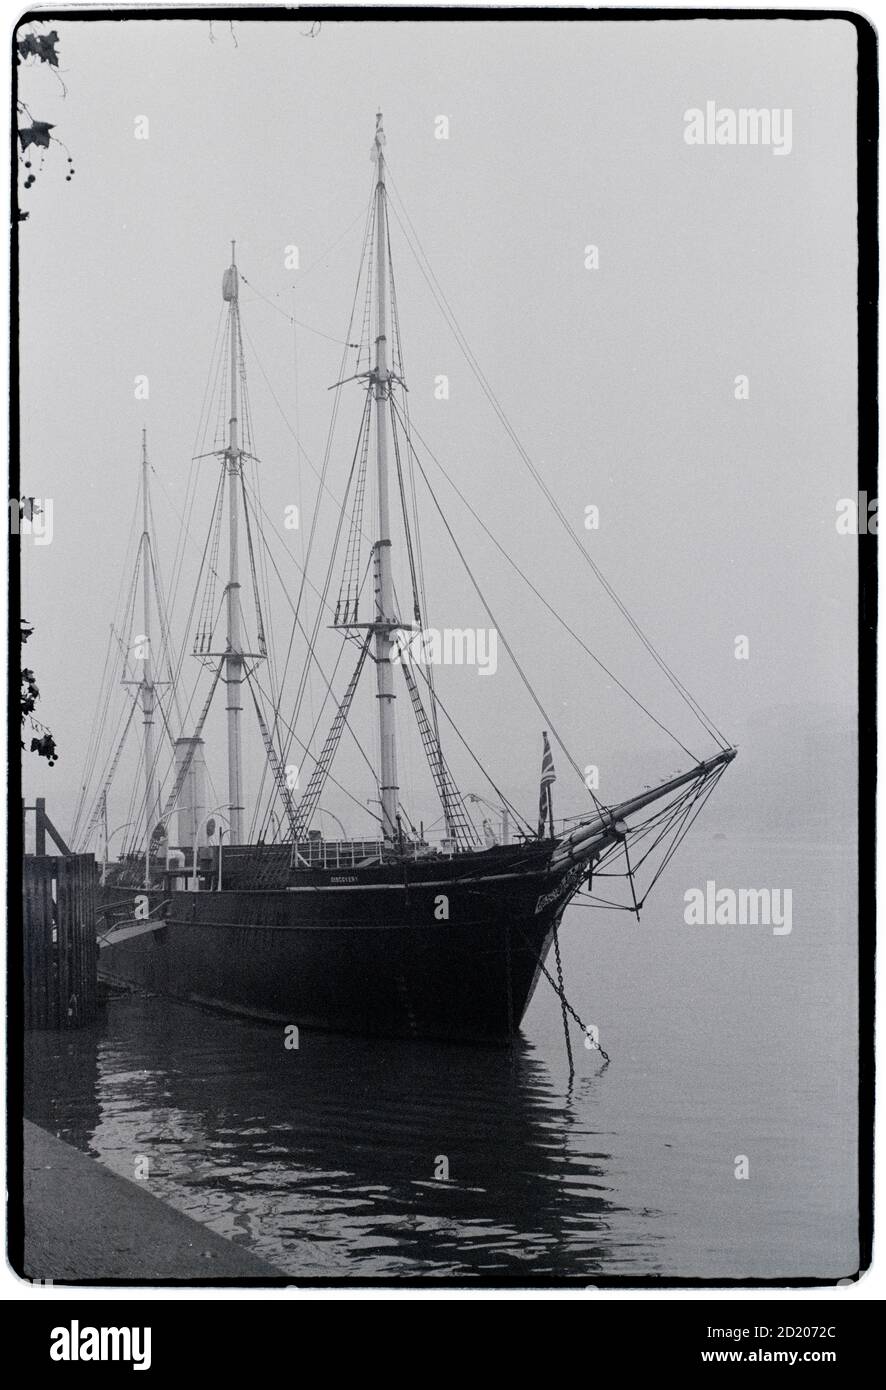 London views in the mist November 1968 The River Thames, London England in misty foggy conditions. Captain Scotts ship The Discovery. Wikipedia: RRS Discovery is a barque-rigged auxiliary steamship built for Antarctic research, and launched in 1901. She was the last traditional wooden three-masted ship to be built in the United Kingdom. Her first mission was the British National Antarctic Expedition, carrying Robert Falcon Scott and Ernest Shackleton on their first, and highly successful, journey to the Antarctic, known as the Discovery Expedition. Stock Photo